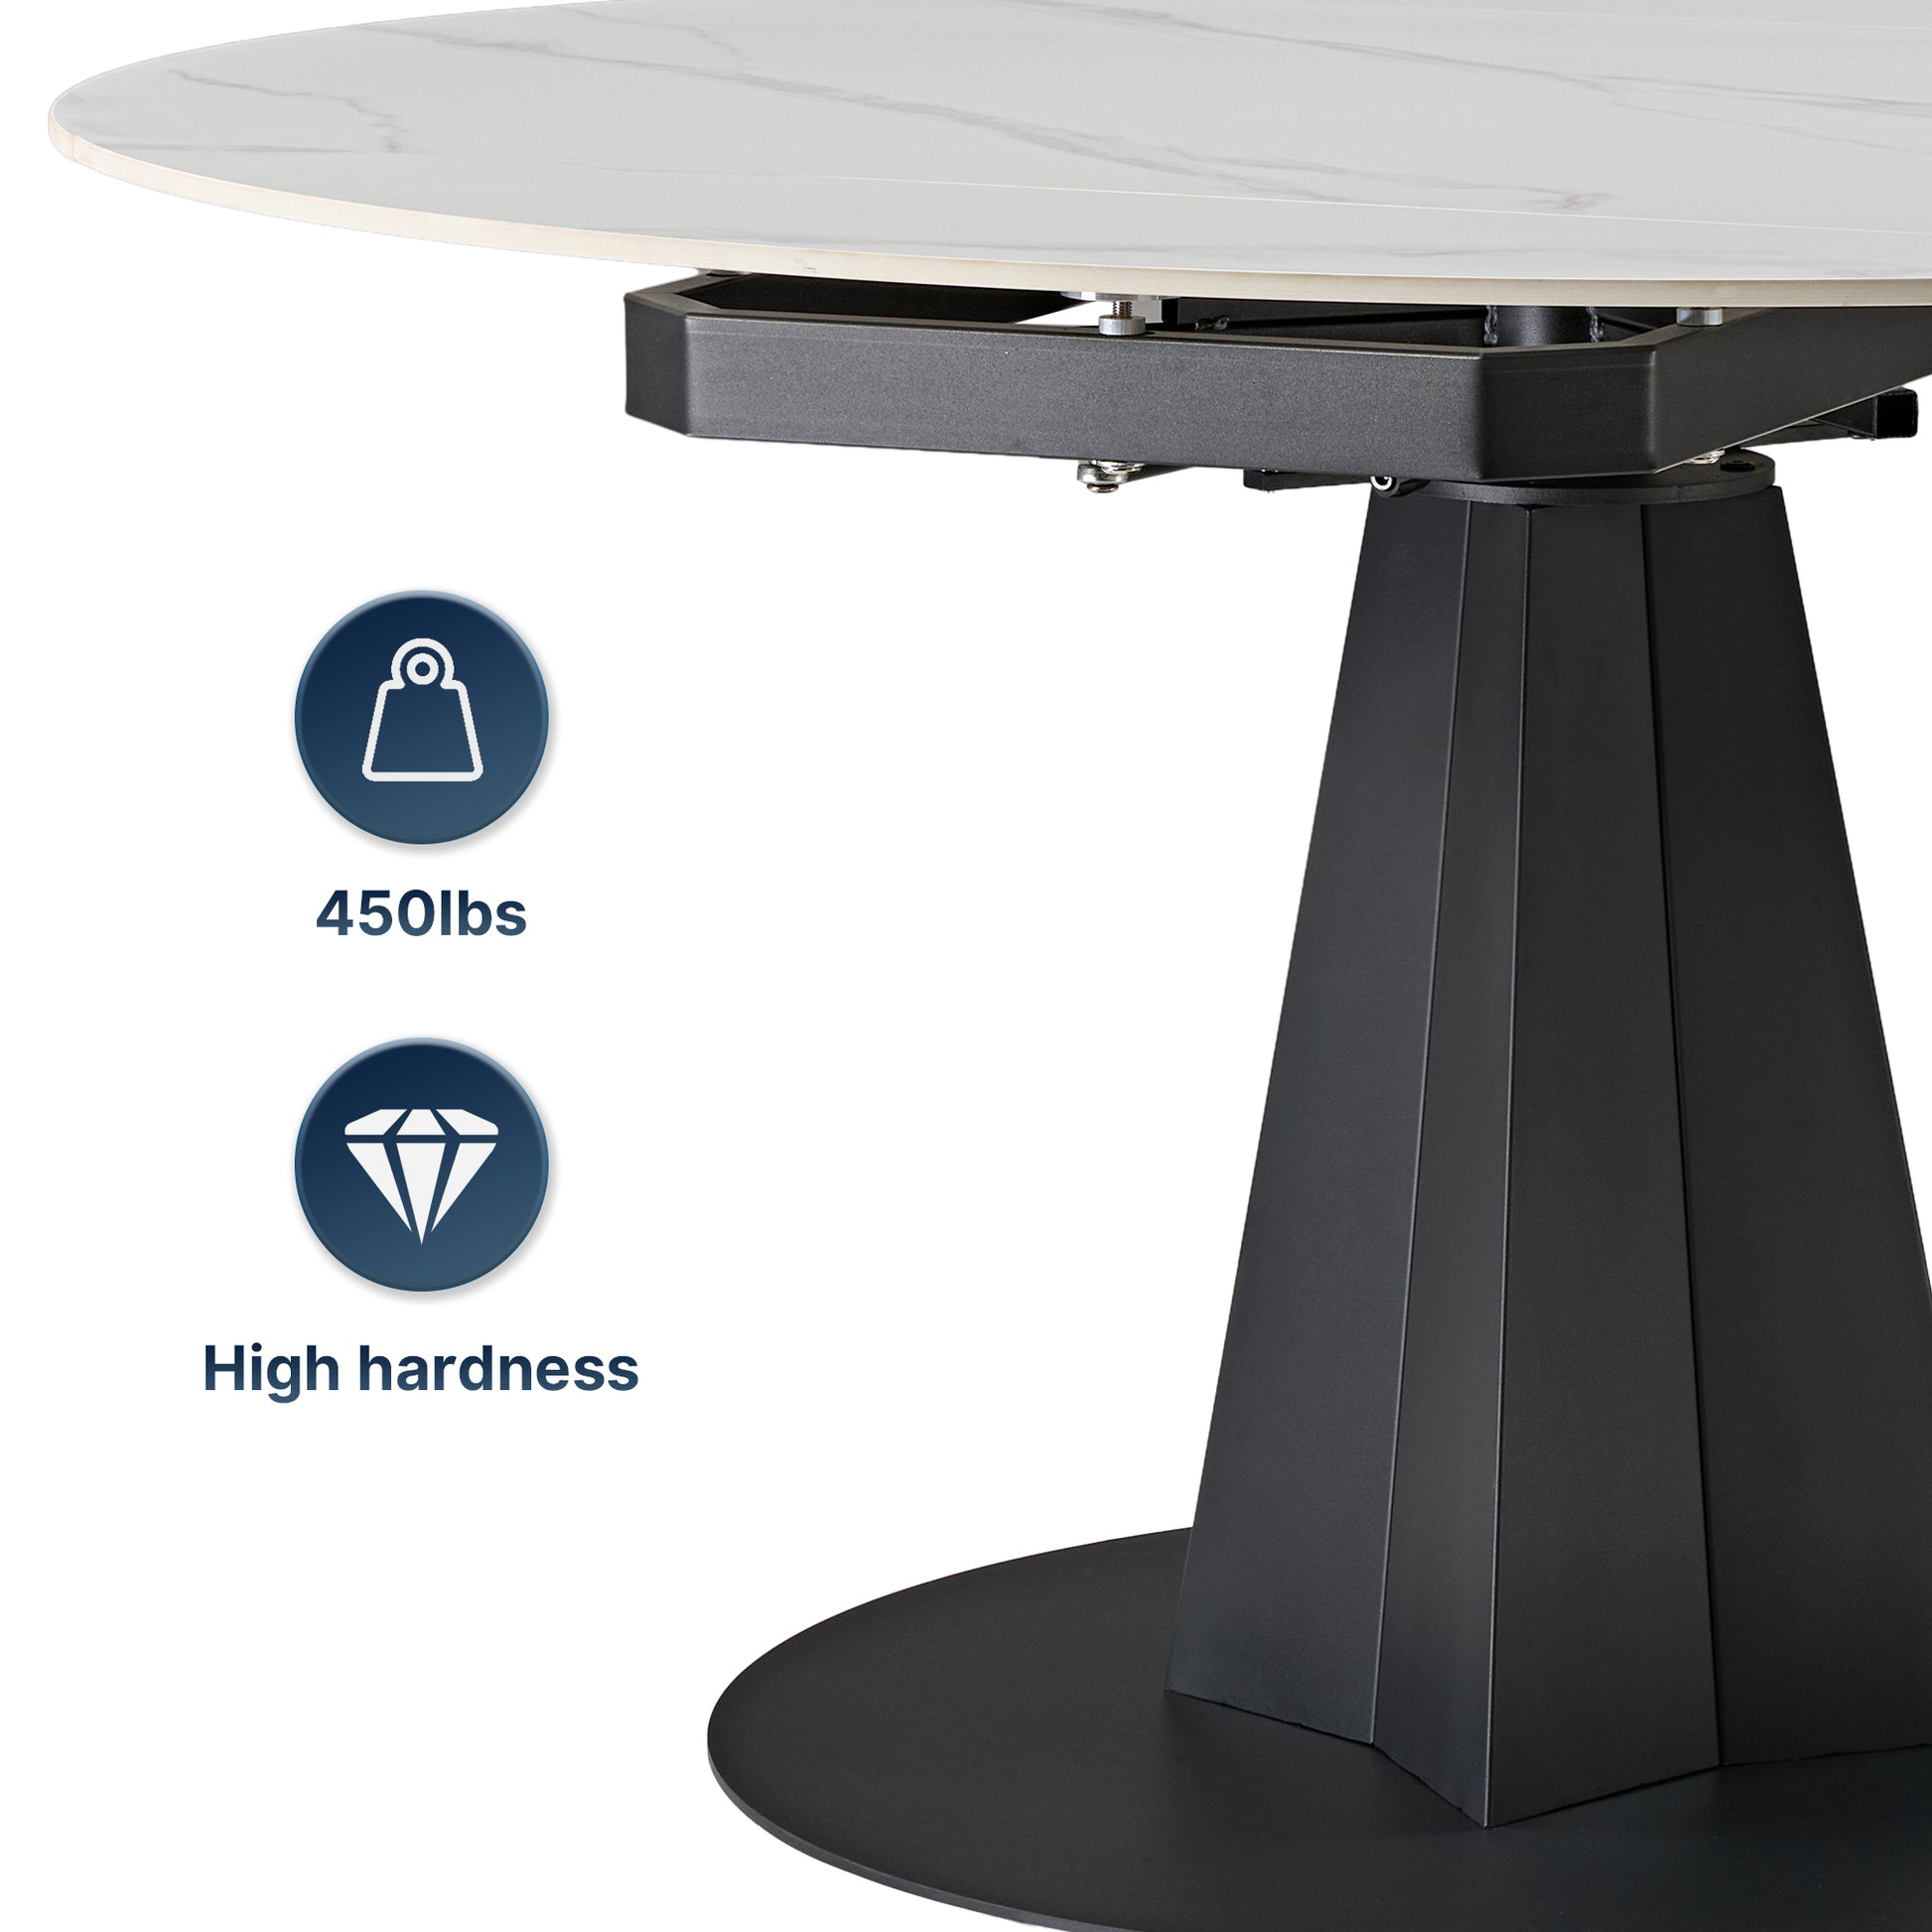 53 inch White Round Extending Dining Table with Black Base, Carbon Steel Table Legs, white